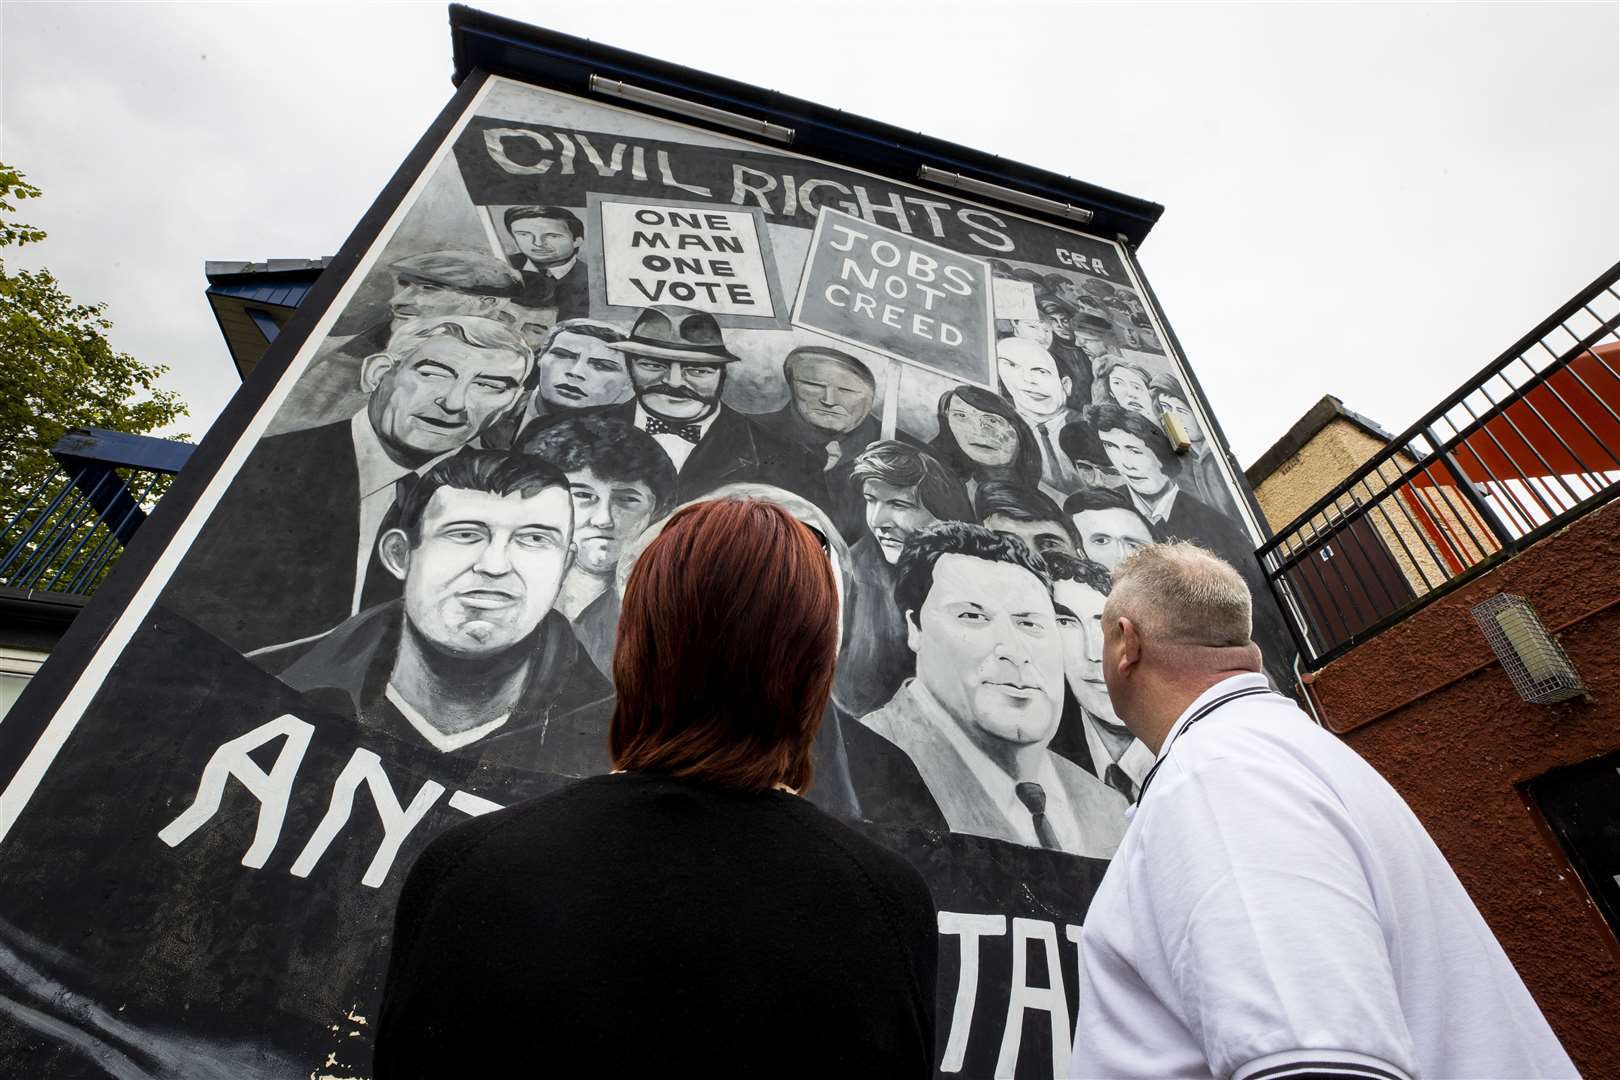 A couple look at a mural in the Bogside of Derry City that shows John Hume and others important figures from the civil rights era (Liam McBurney/PA)